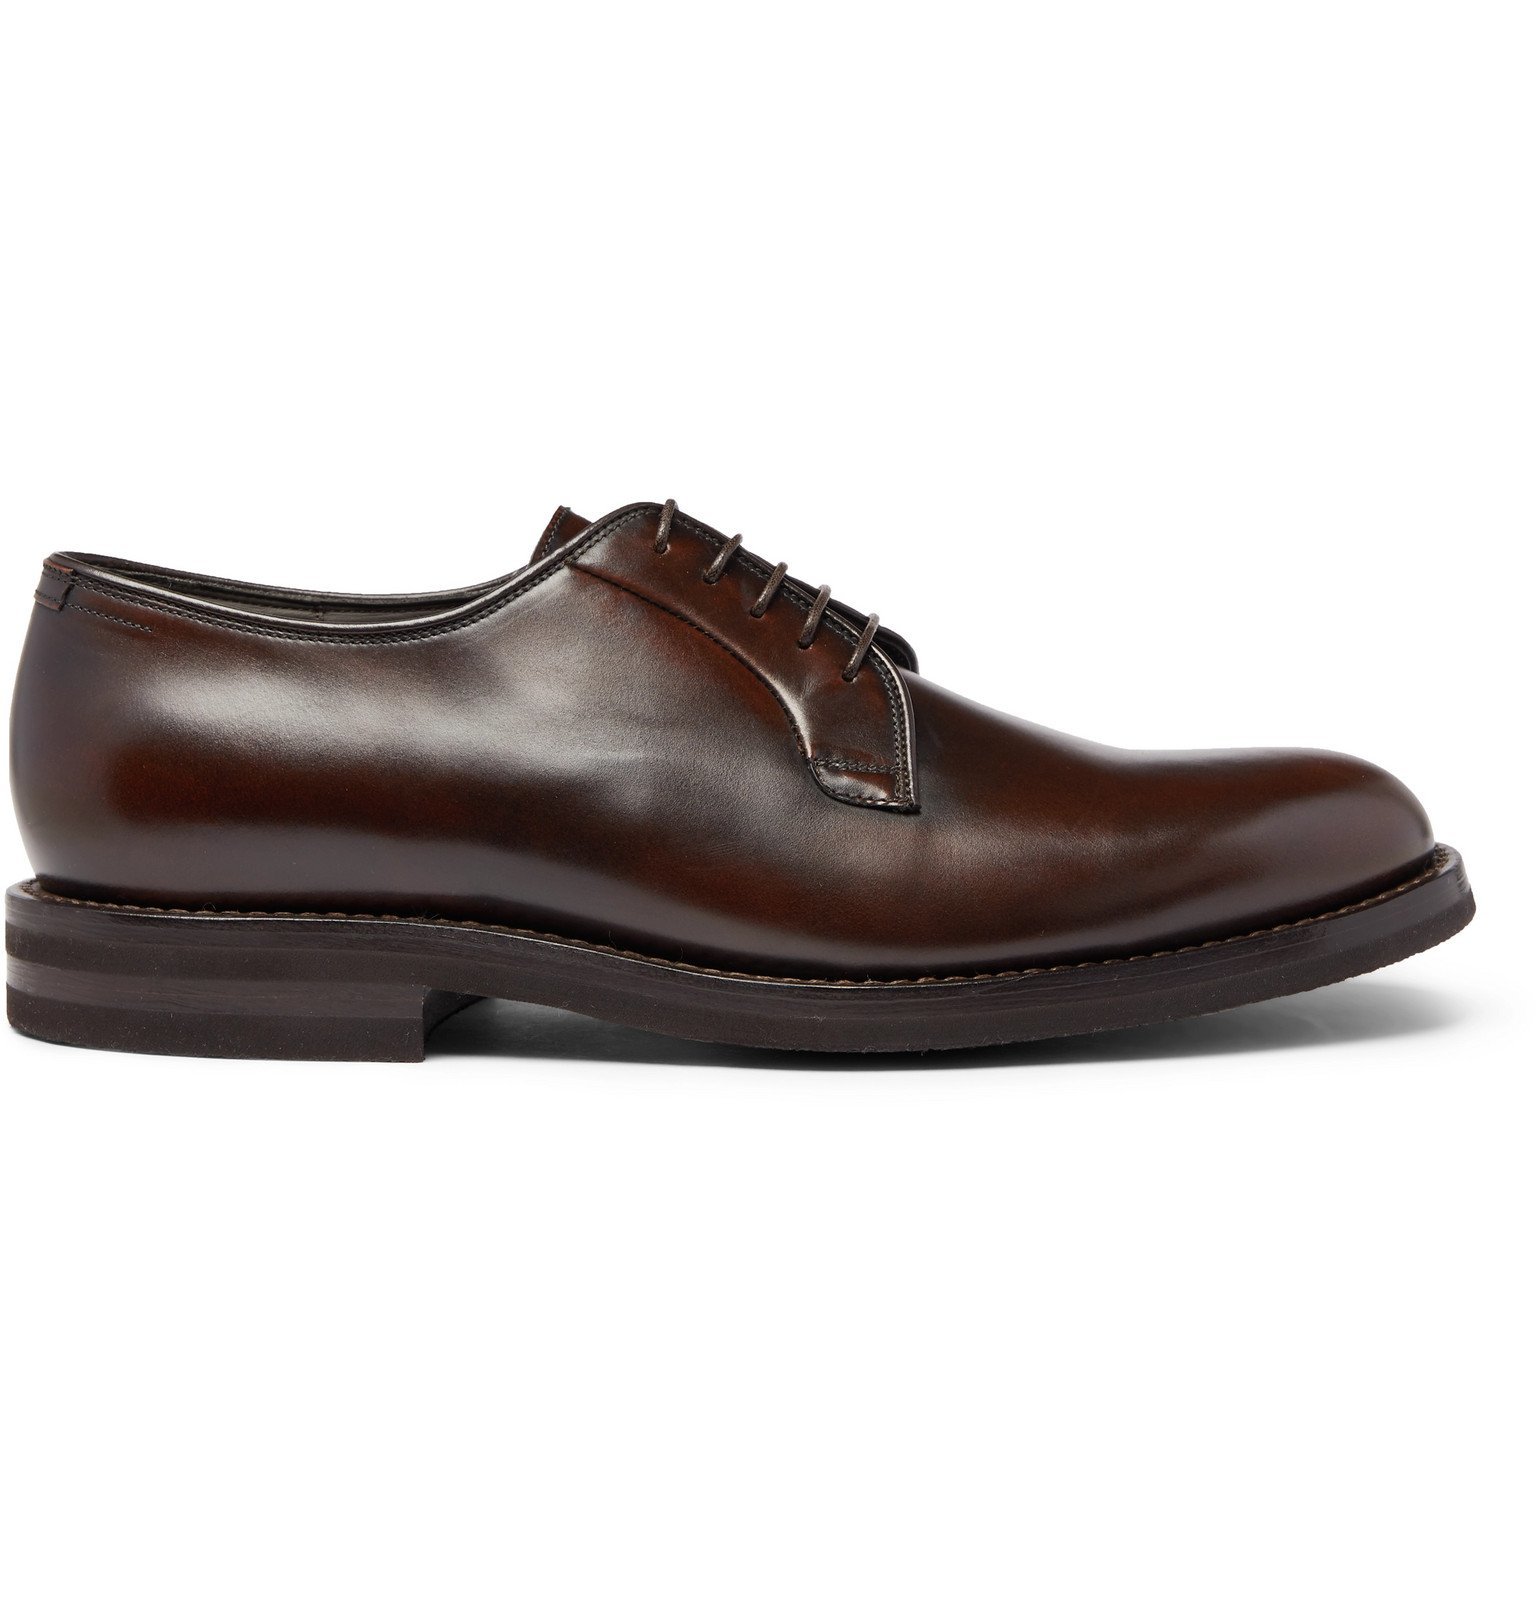 Brunello Cucinelli - Polished-Leather Derby Shoes - Brown Brunello ...